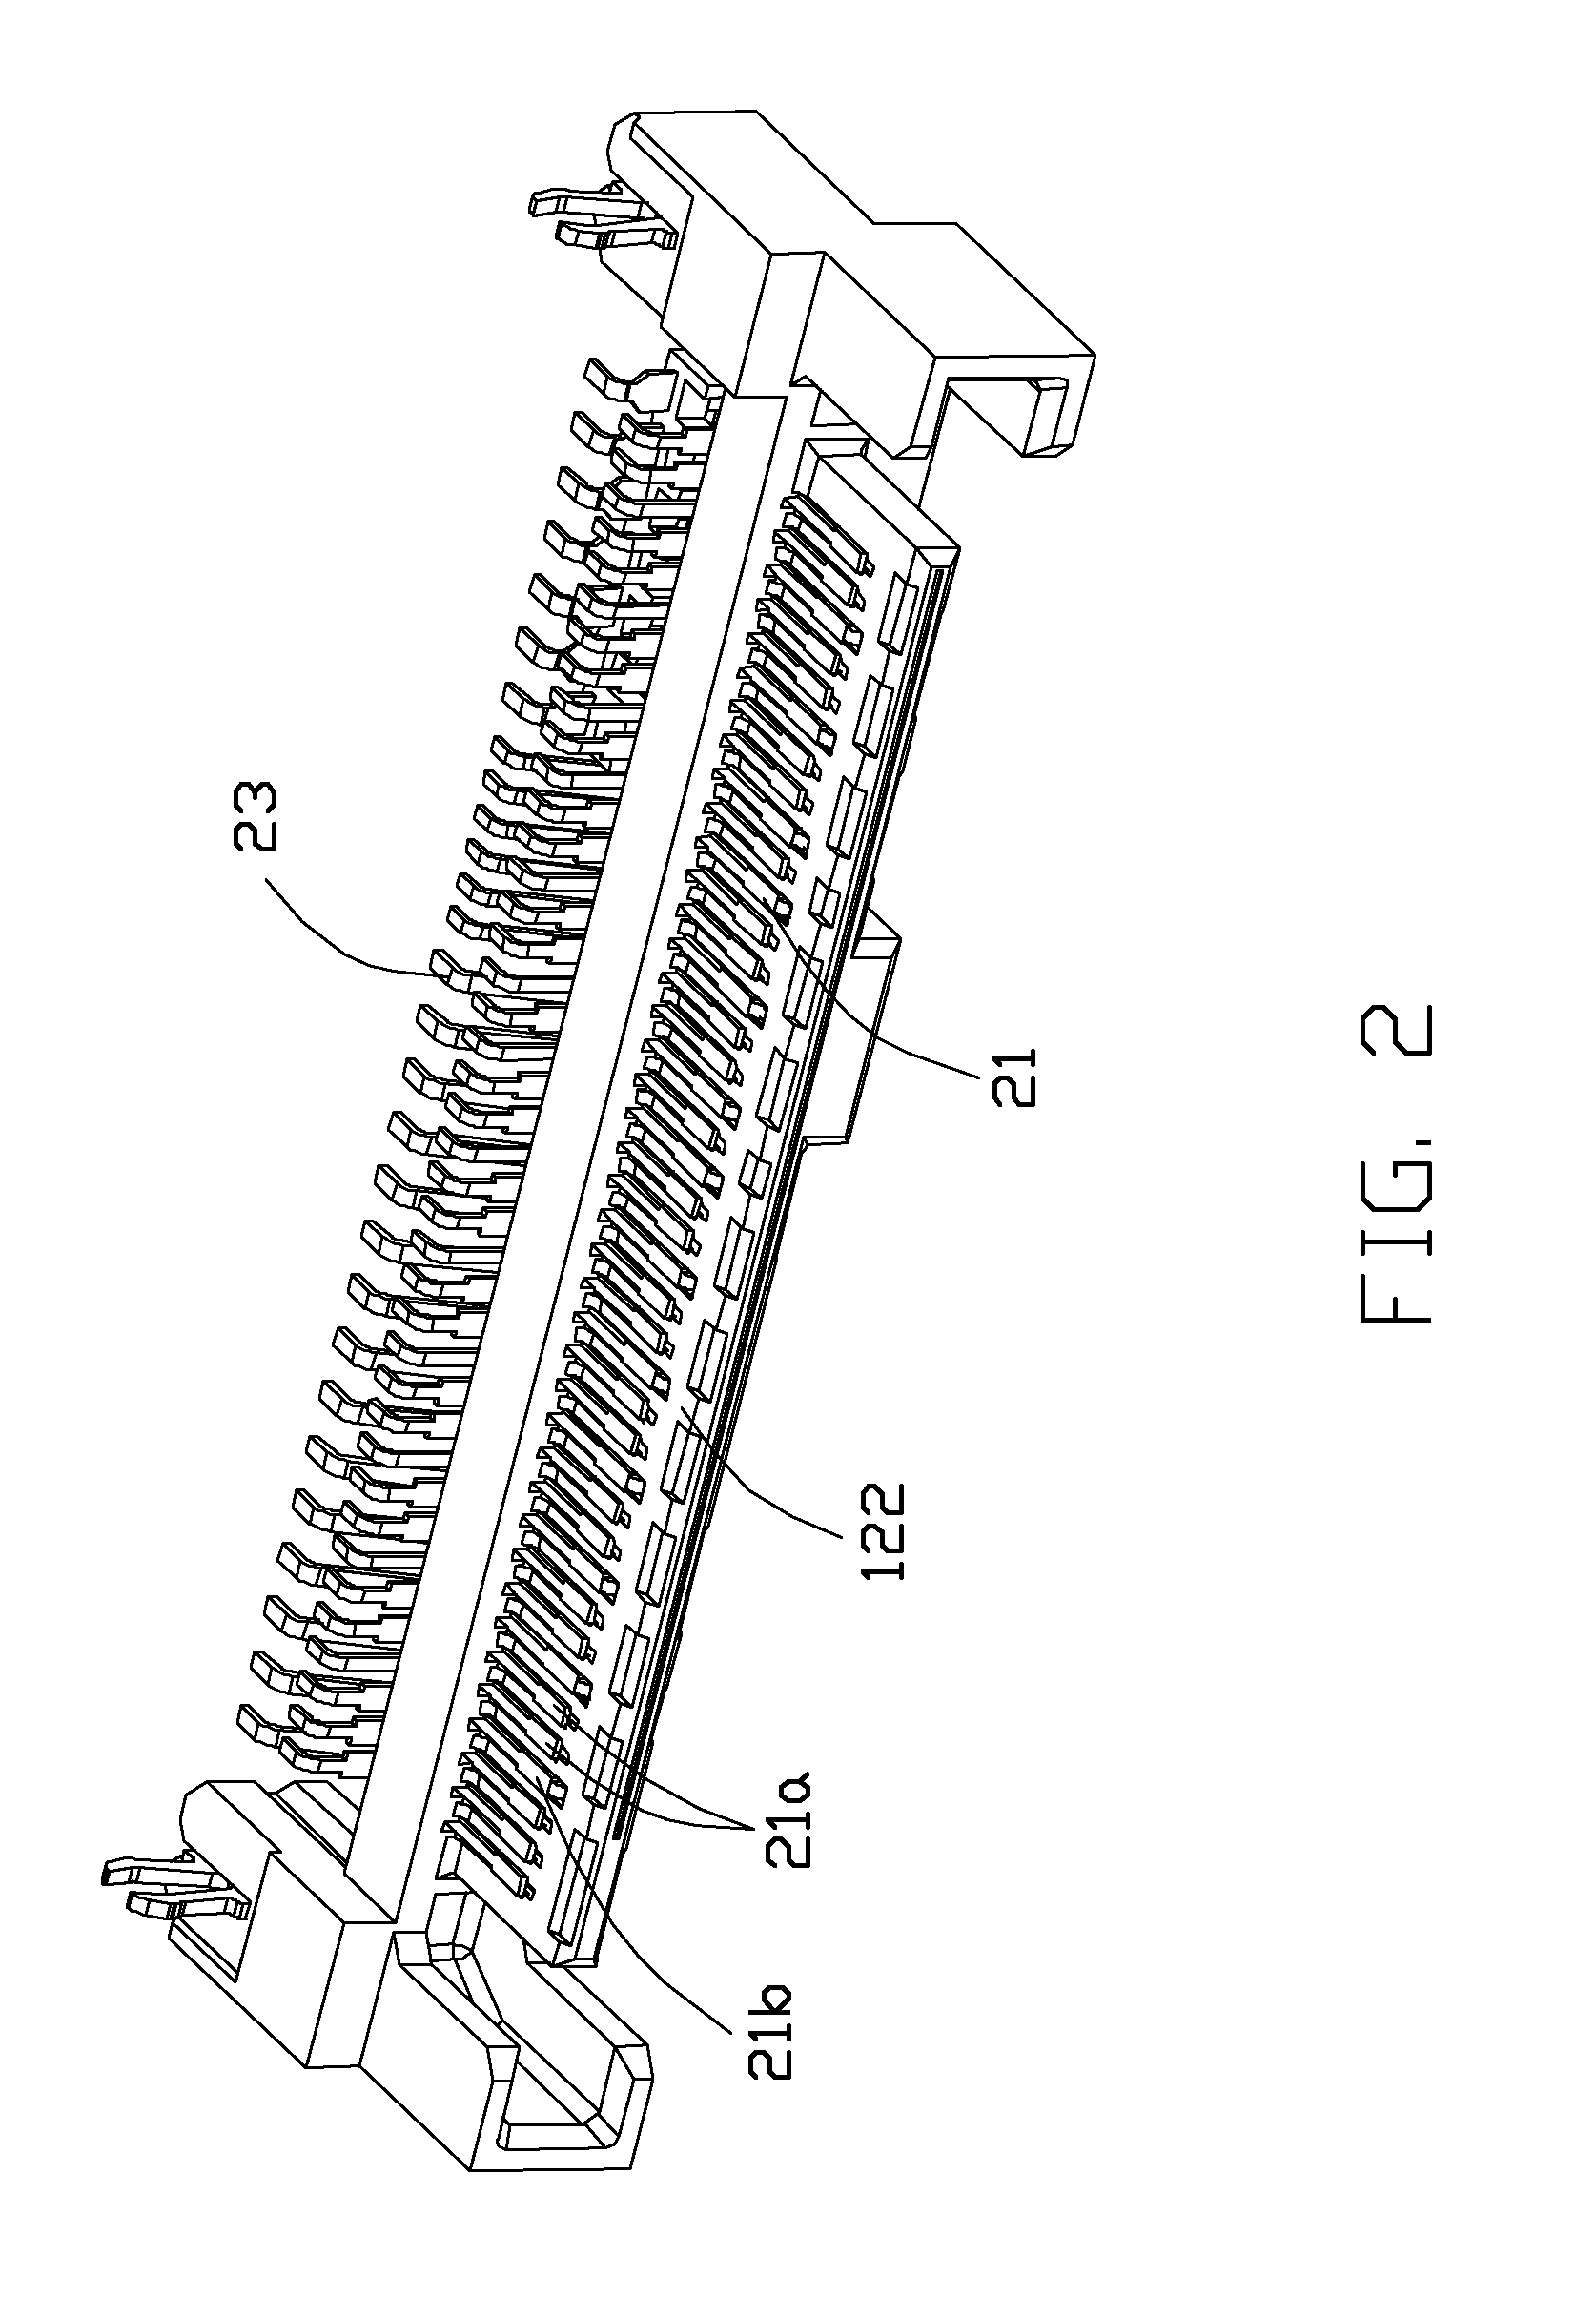 Electrical connector with imprived grounding bar